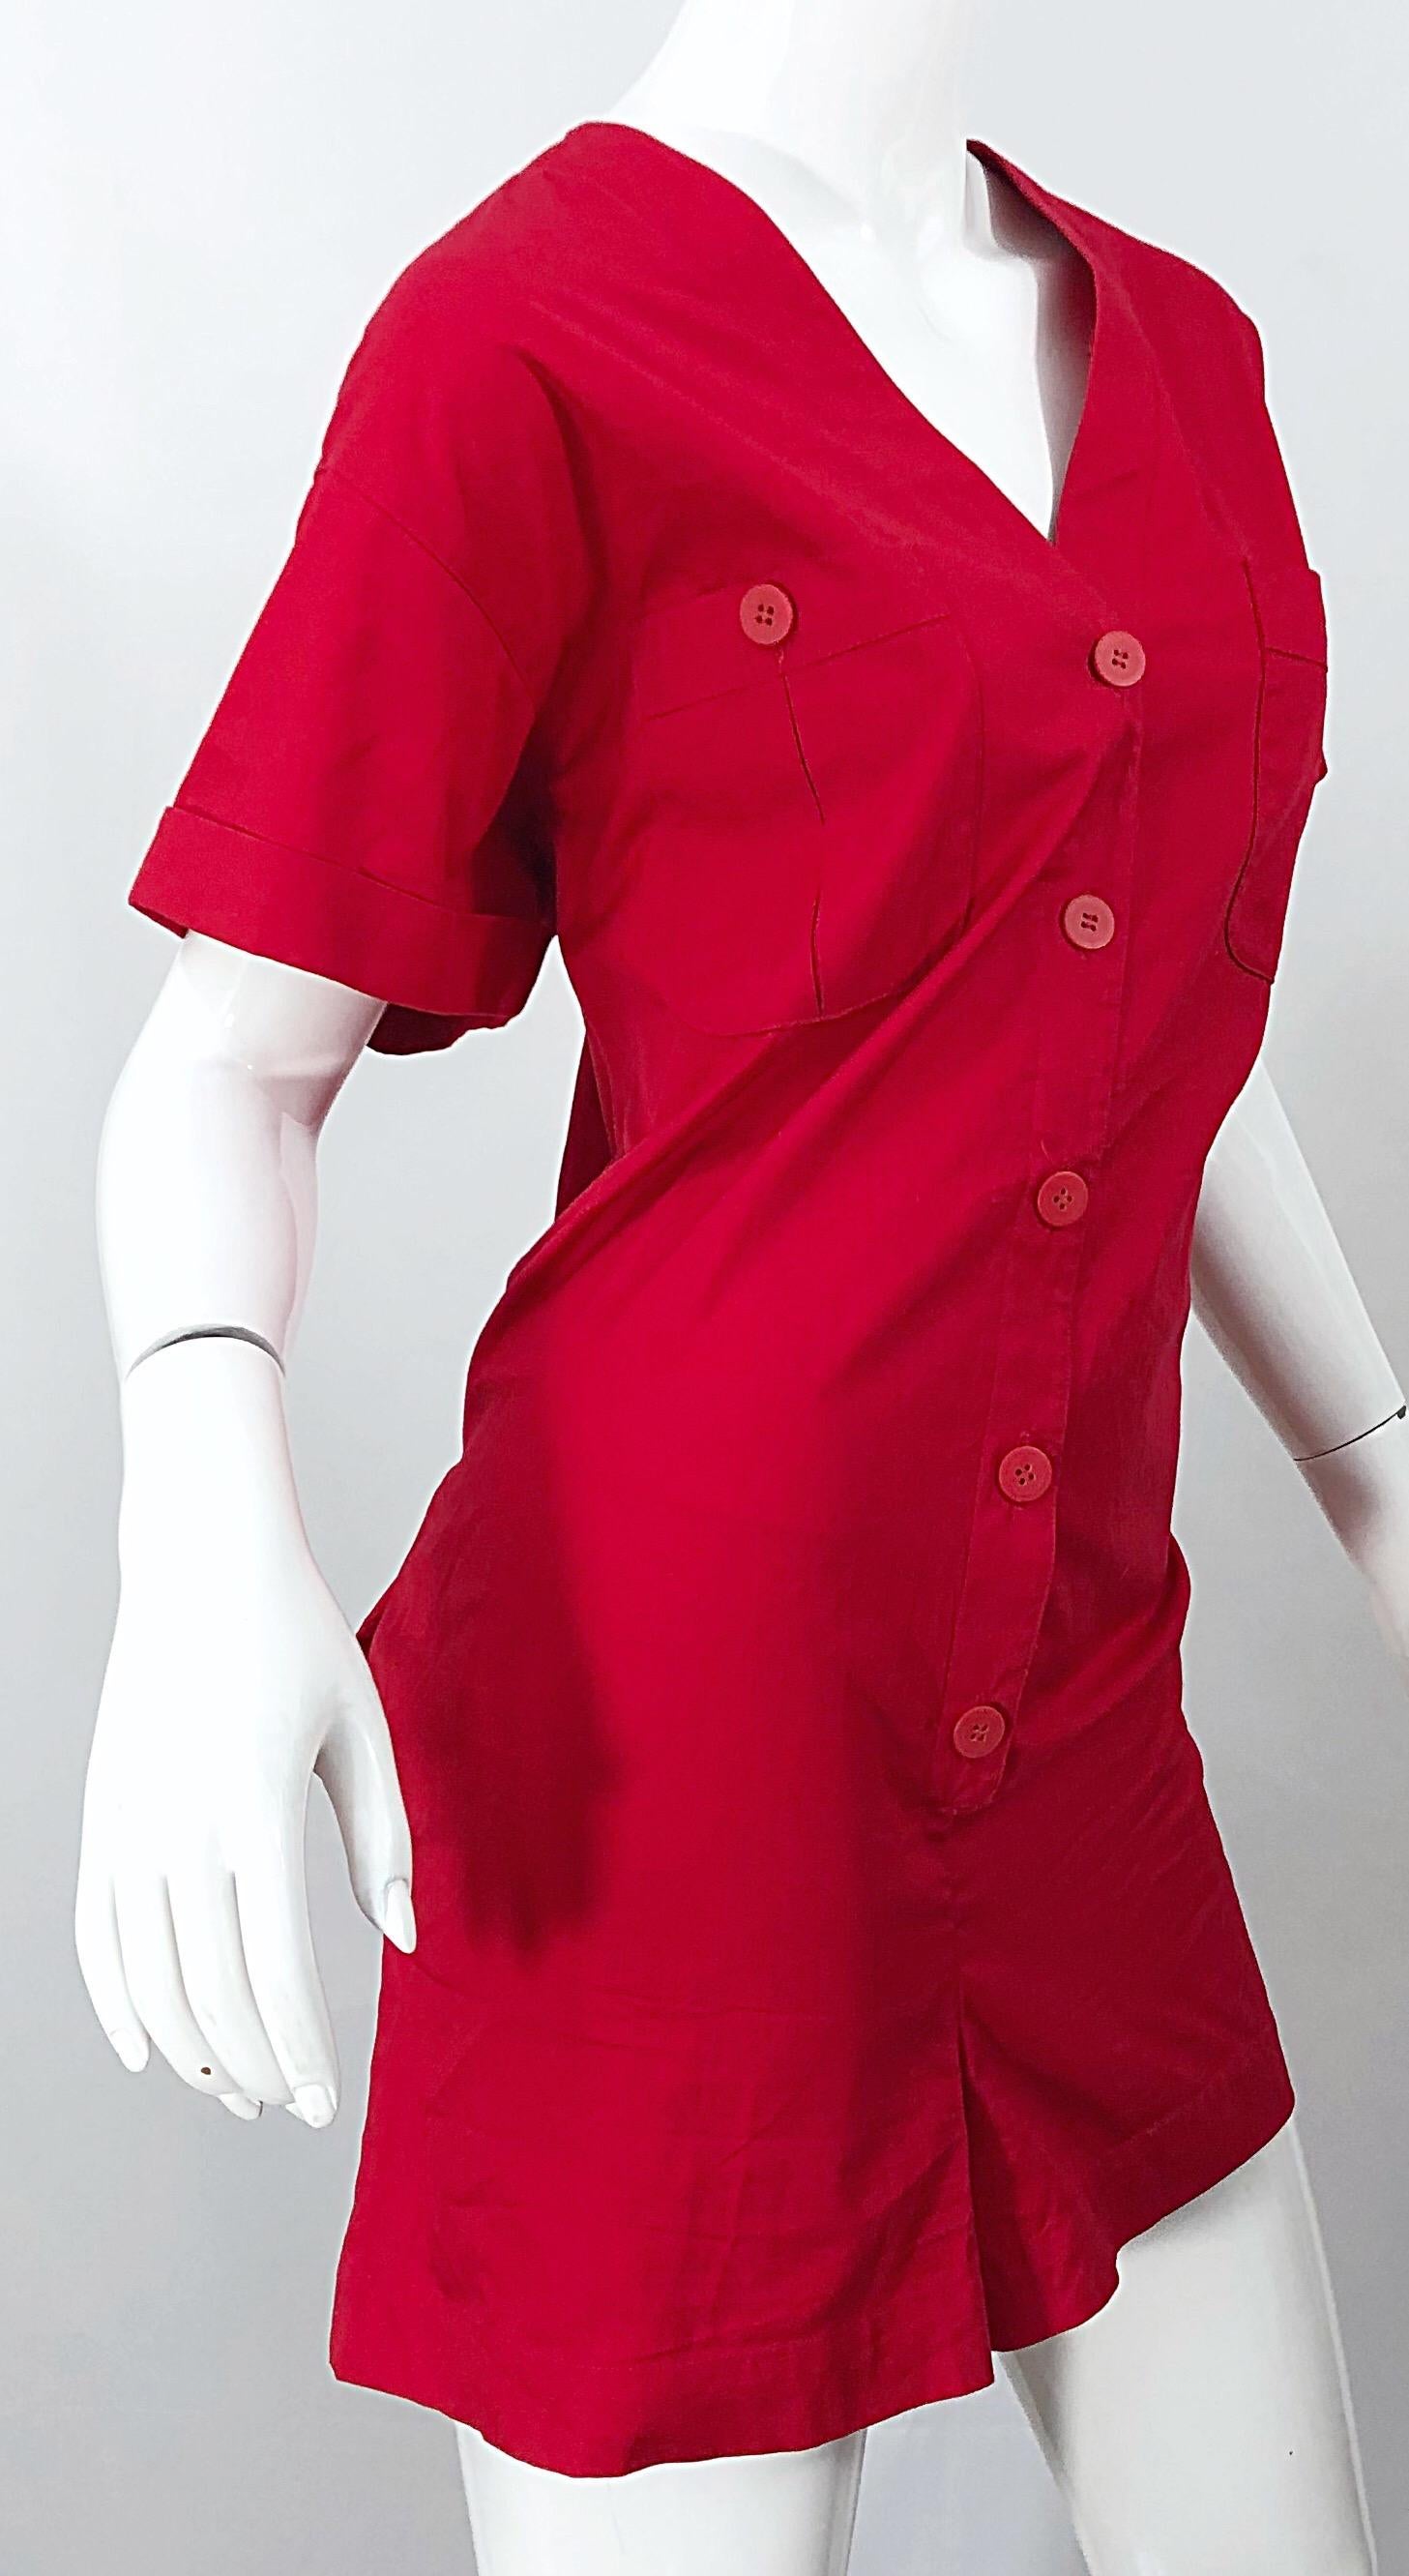 NWT Vintage Christian Dior Romper Size 14 Lipstick Red Cotton One Piece Jumpsuit In New Condition For Sale In San Diego, CA